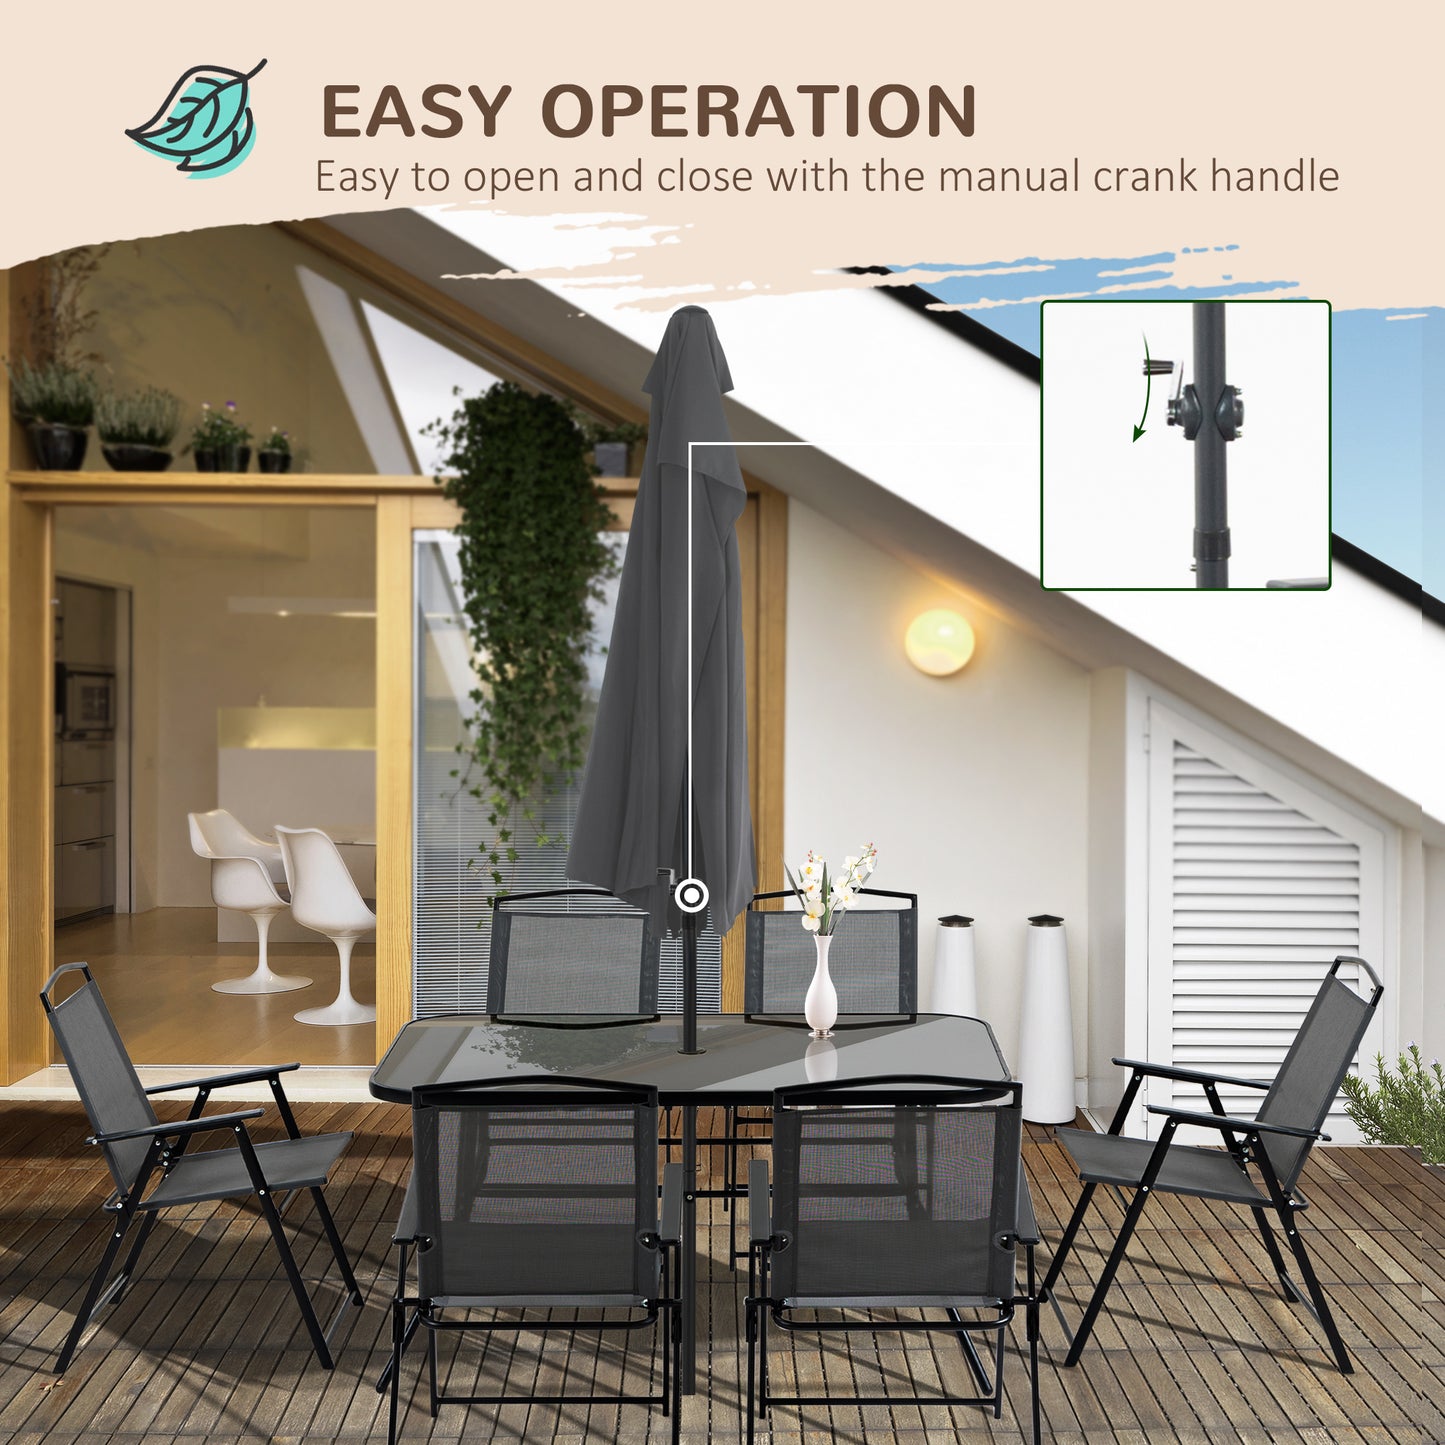 8 Piece Patio Dining Set for 6 with Umbrella, Outdoor Table and Chairs with 6 Folding Chairs with Mesh Seat and Rectangle Dining Table with Umbrella Hole, Black - Gallery Canada